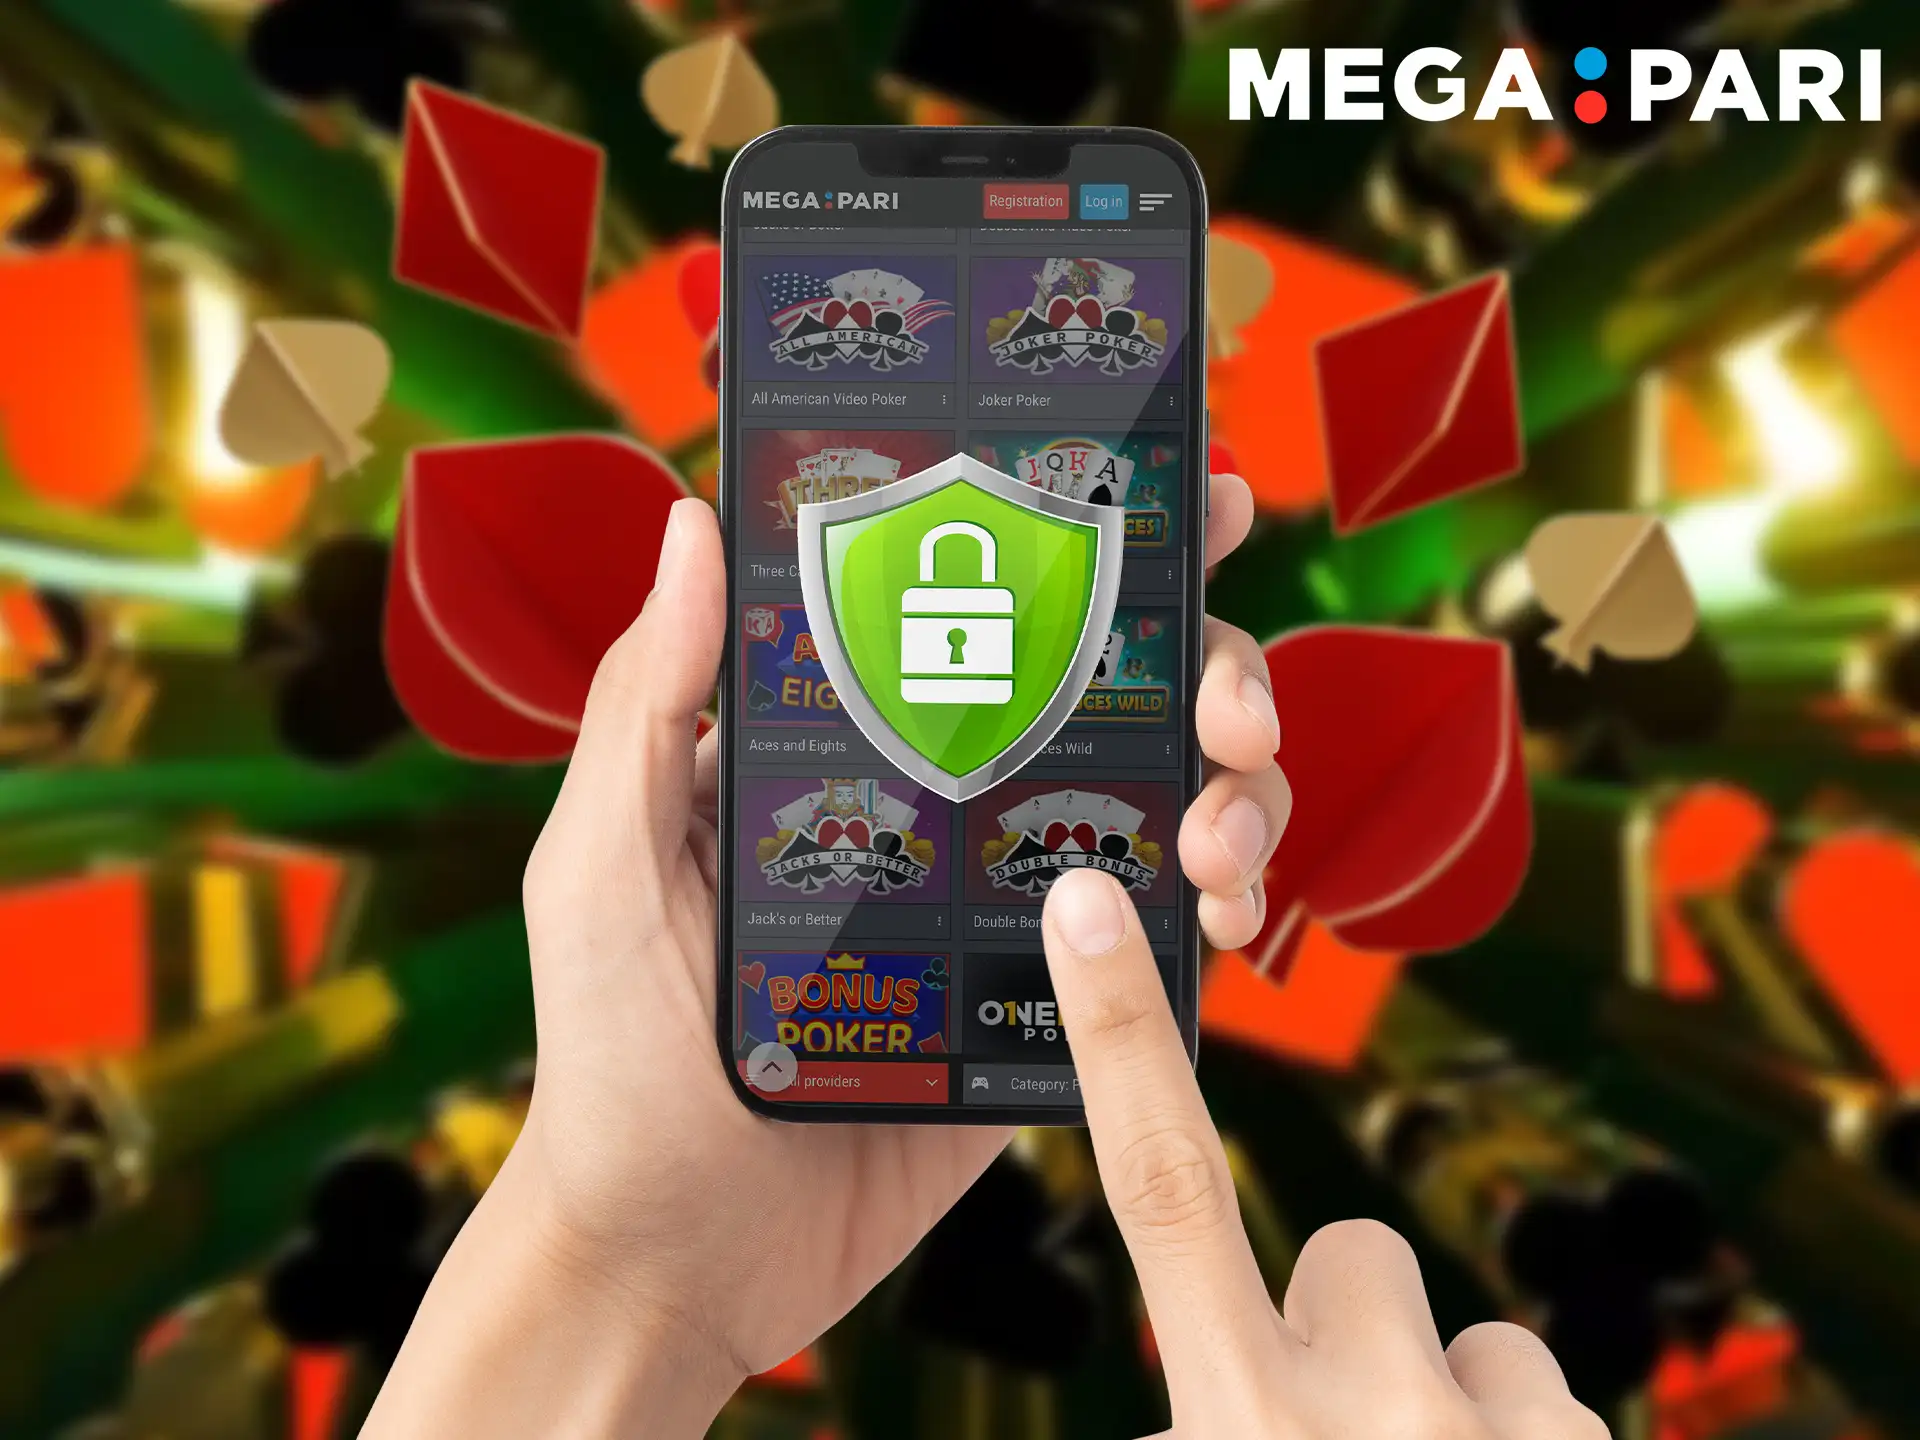 Megapari's security is guaranteed by special encryption against cyber attacks.